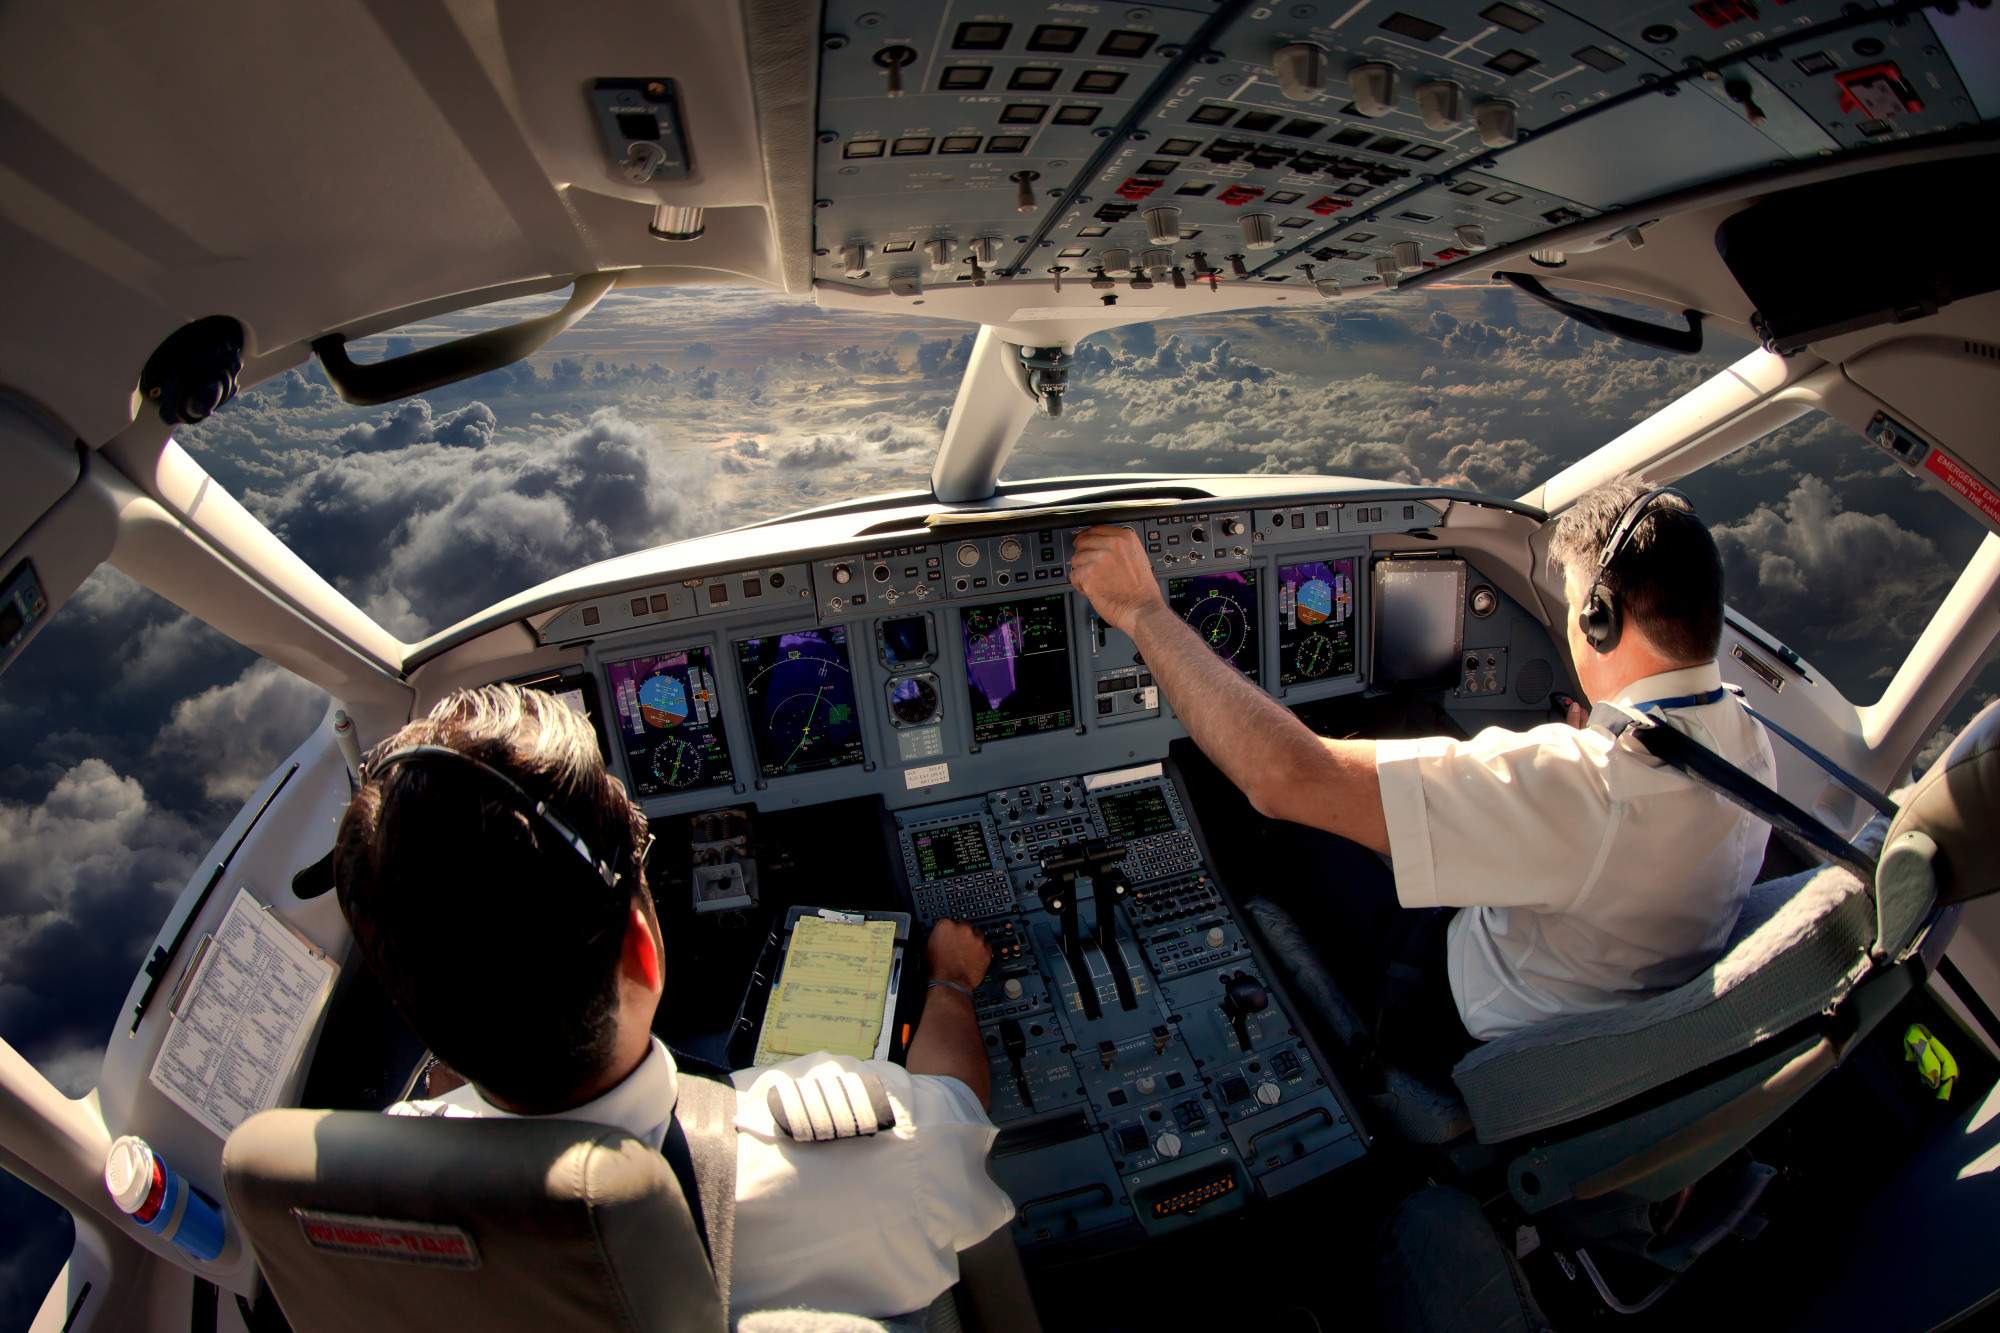 What Are the Career Benefits of Becoming the Best Airline Pilot?